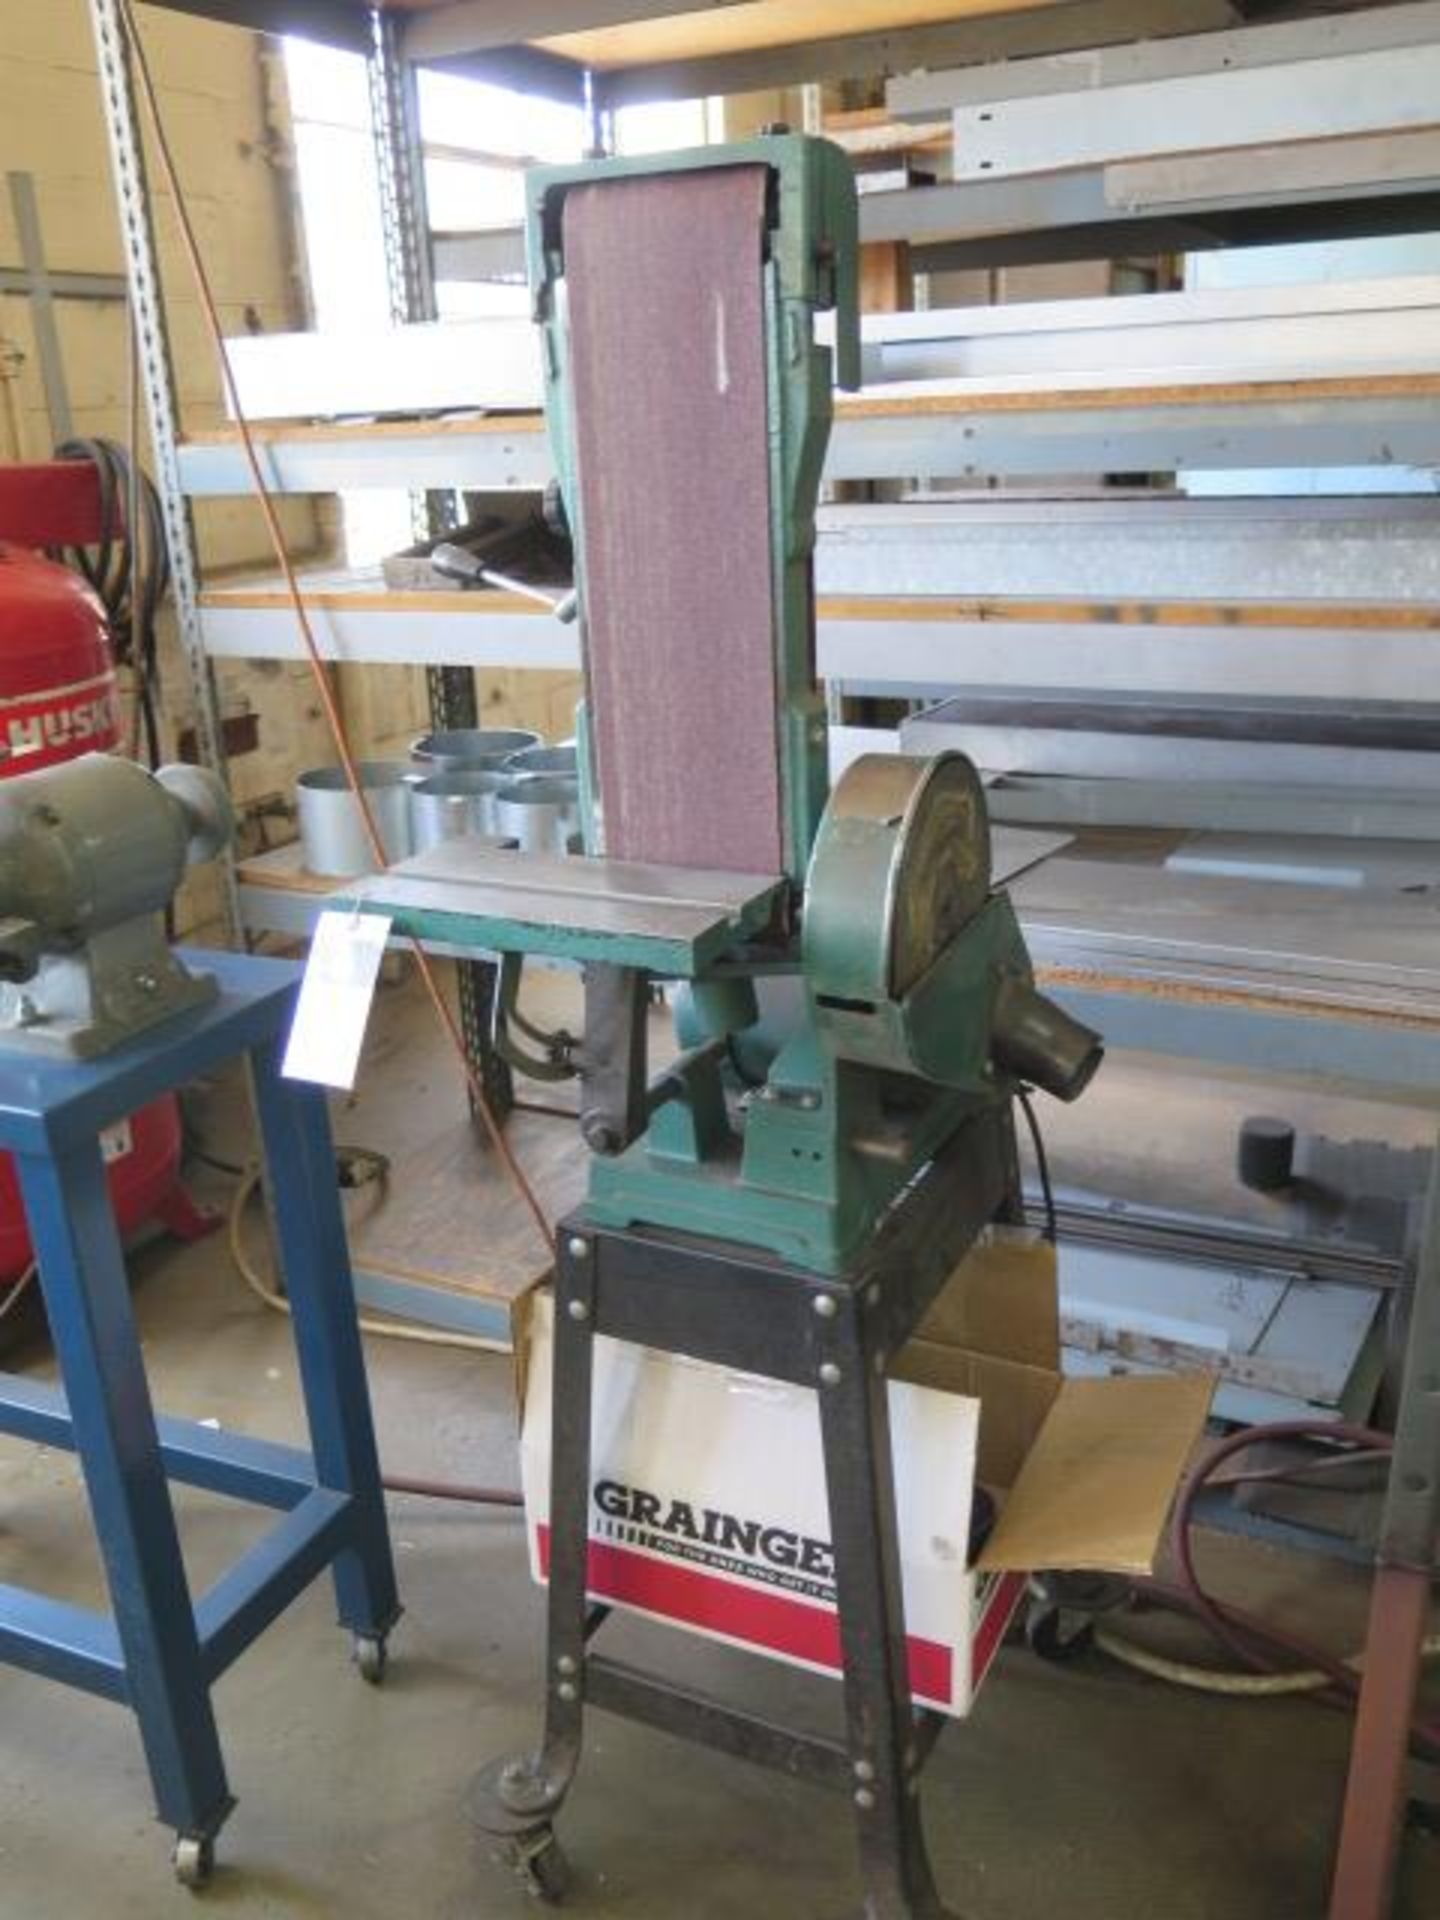 Grizzly mdl. G1014Z 6" Belt / 9" Disc Sander s/n 9-0196 w/ Roll Stand (SOLD AS-IS - NO WARRANTY) - Image 2 of 7